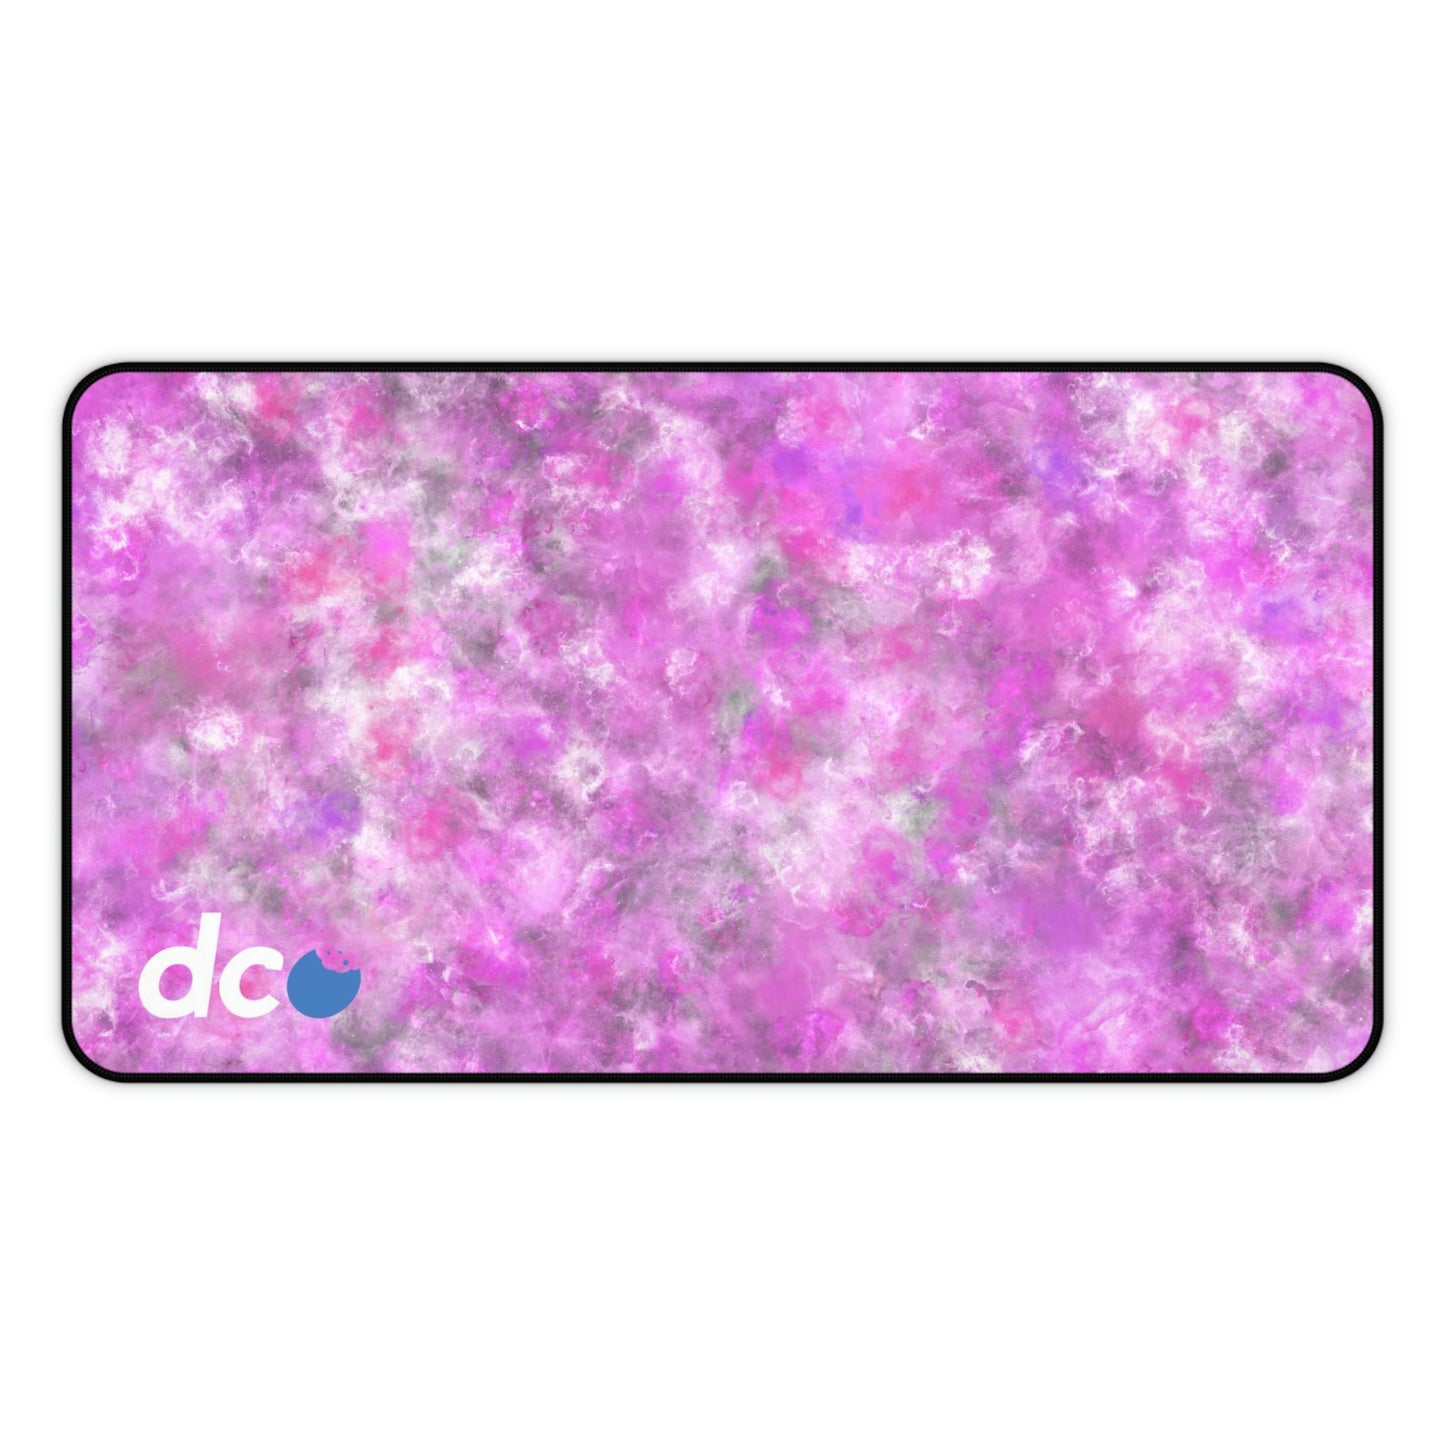 A 12" x 22" desk mat with a fluffy mix of pink, white, and gray.